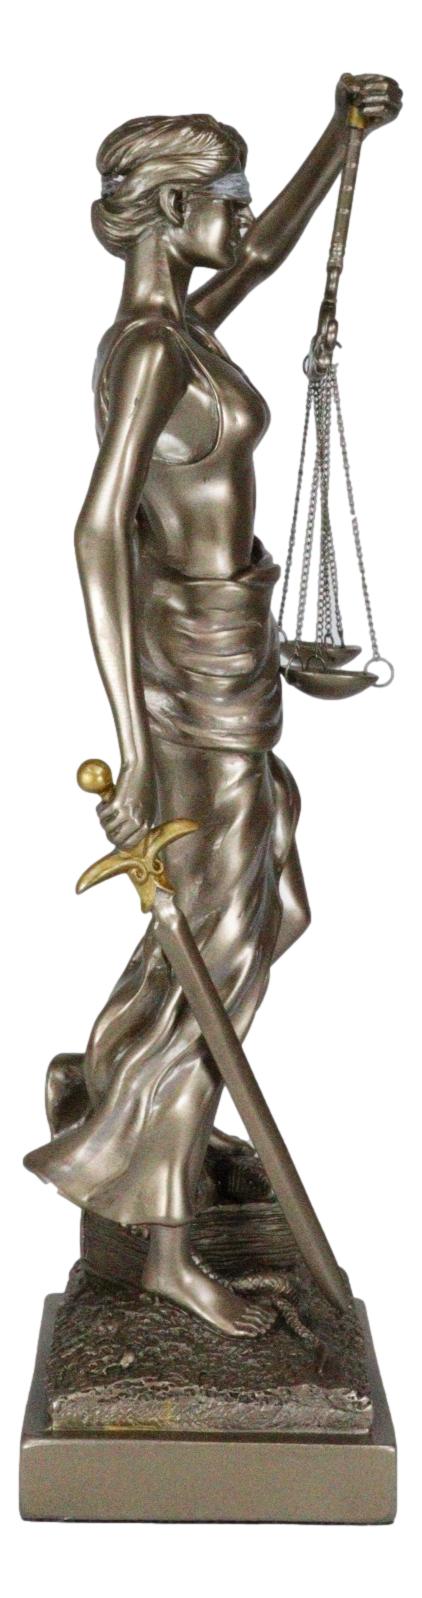 Ebros Gift Resin Contemporary Roman Greek Goddess Lady Of Justice Statue 15"H La Justica Themis